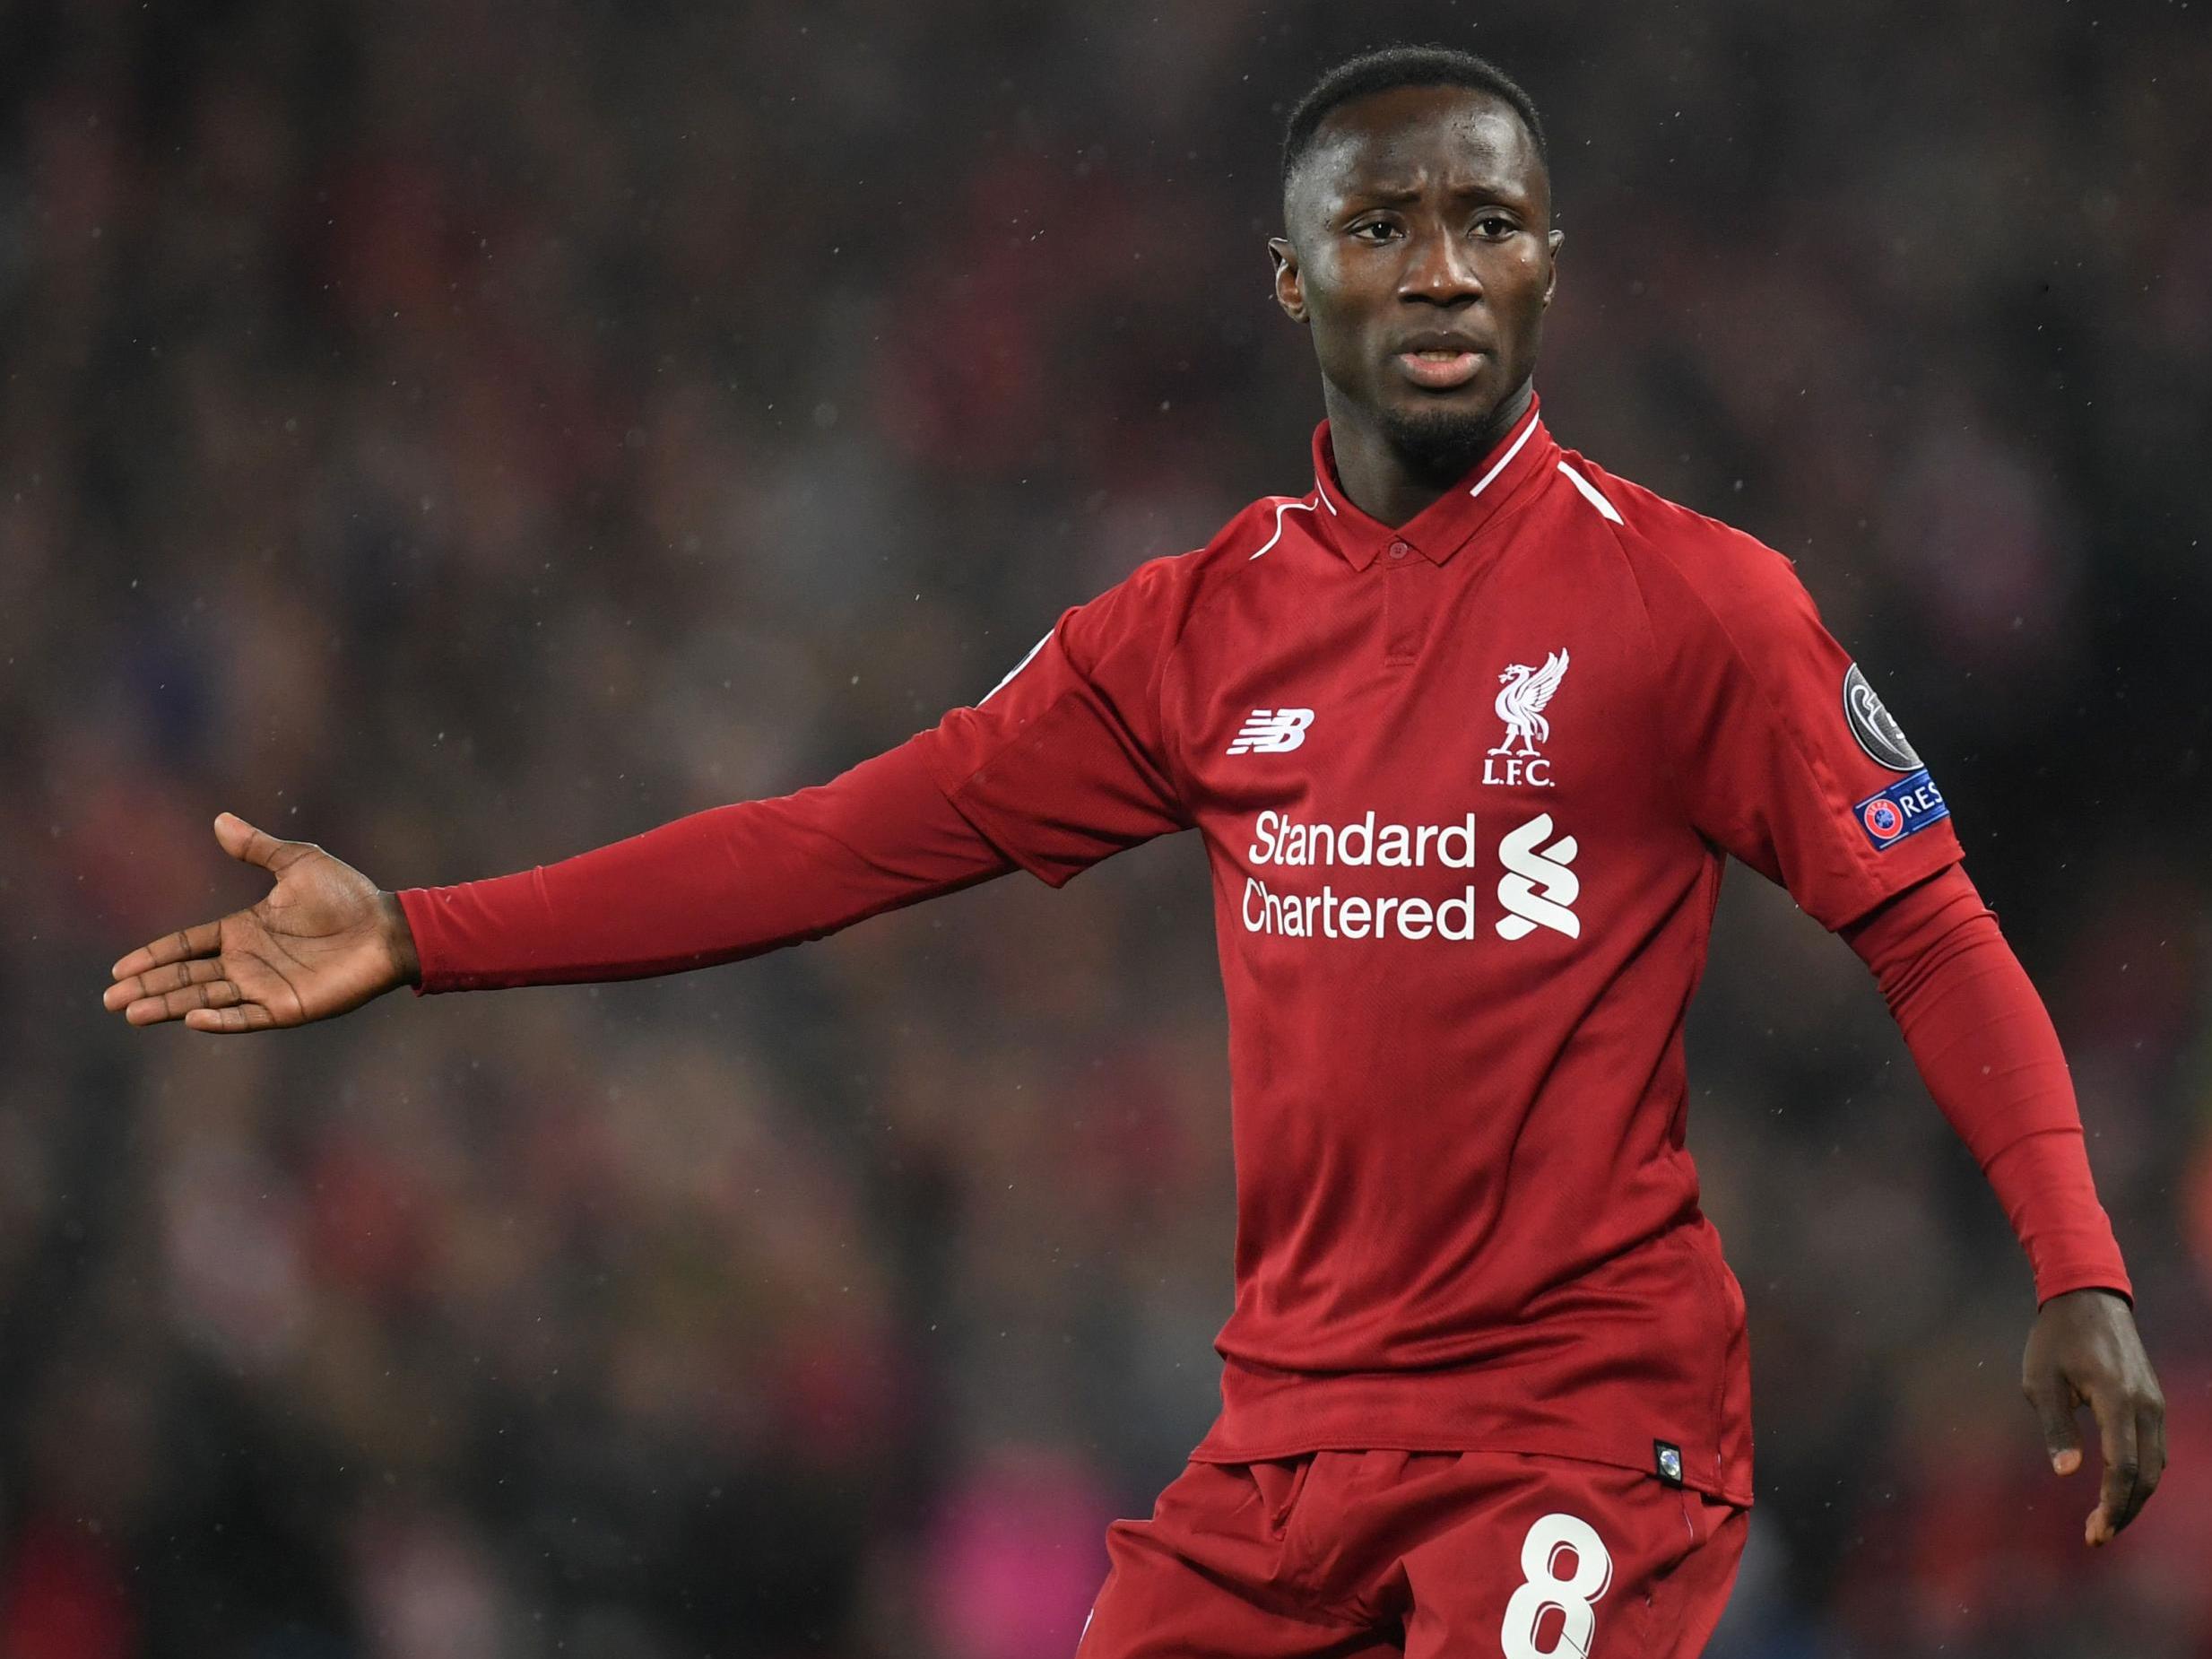 Naby Keita's time at Liverpool has been disrupted by injury